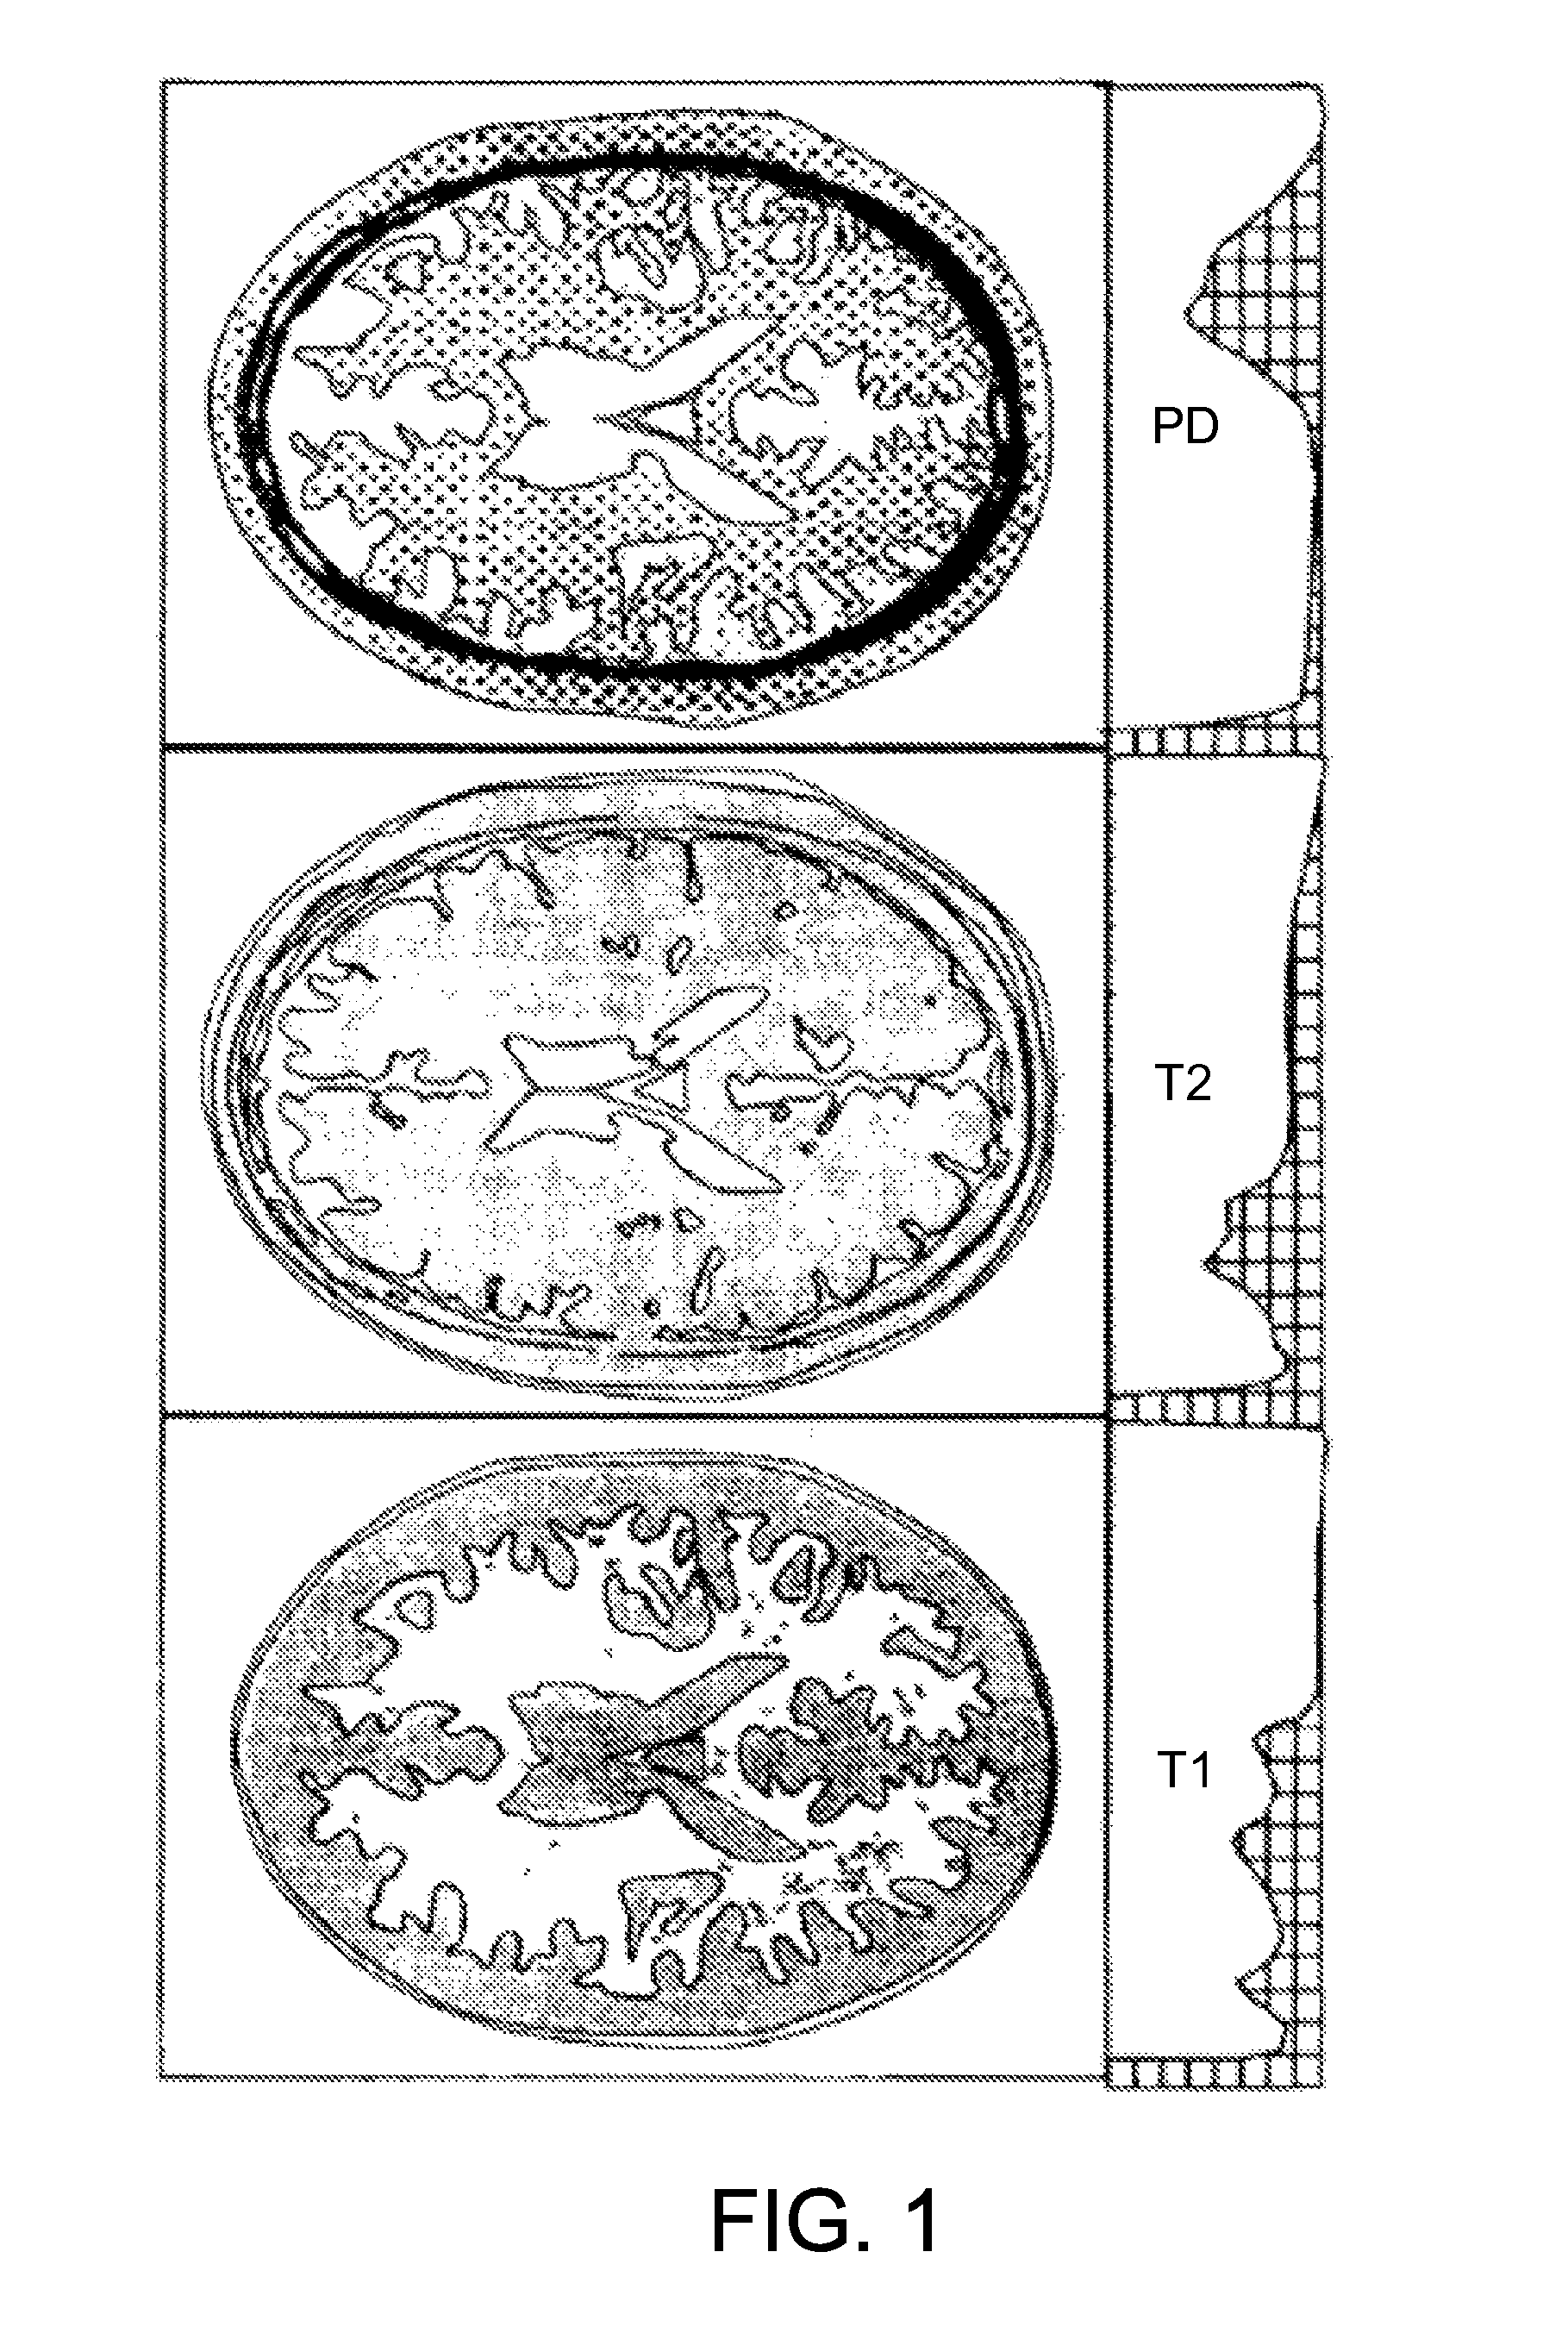 Neurocranial electrostimulation models, systems, devices, and methods